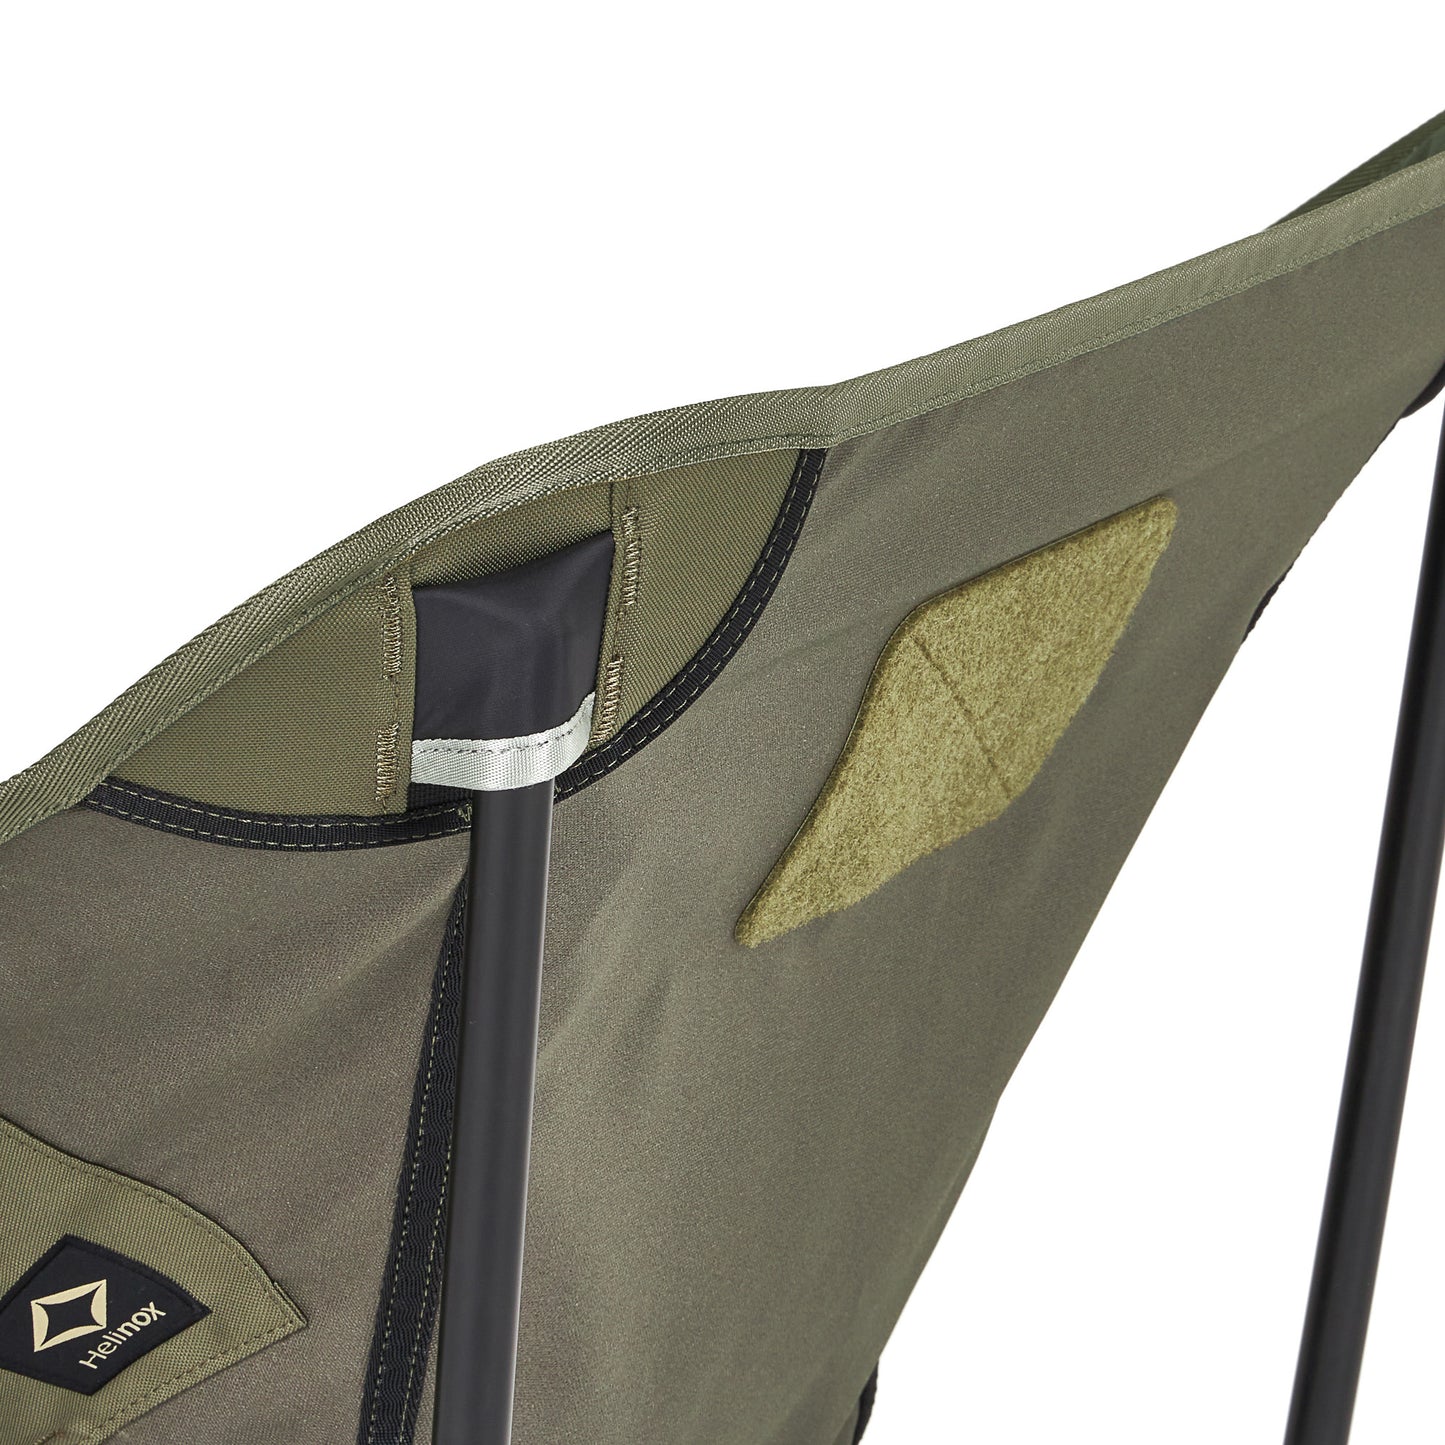 Tac. Incline Chair - Military Olive